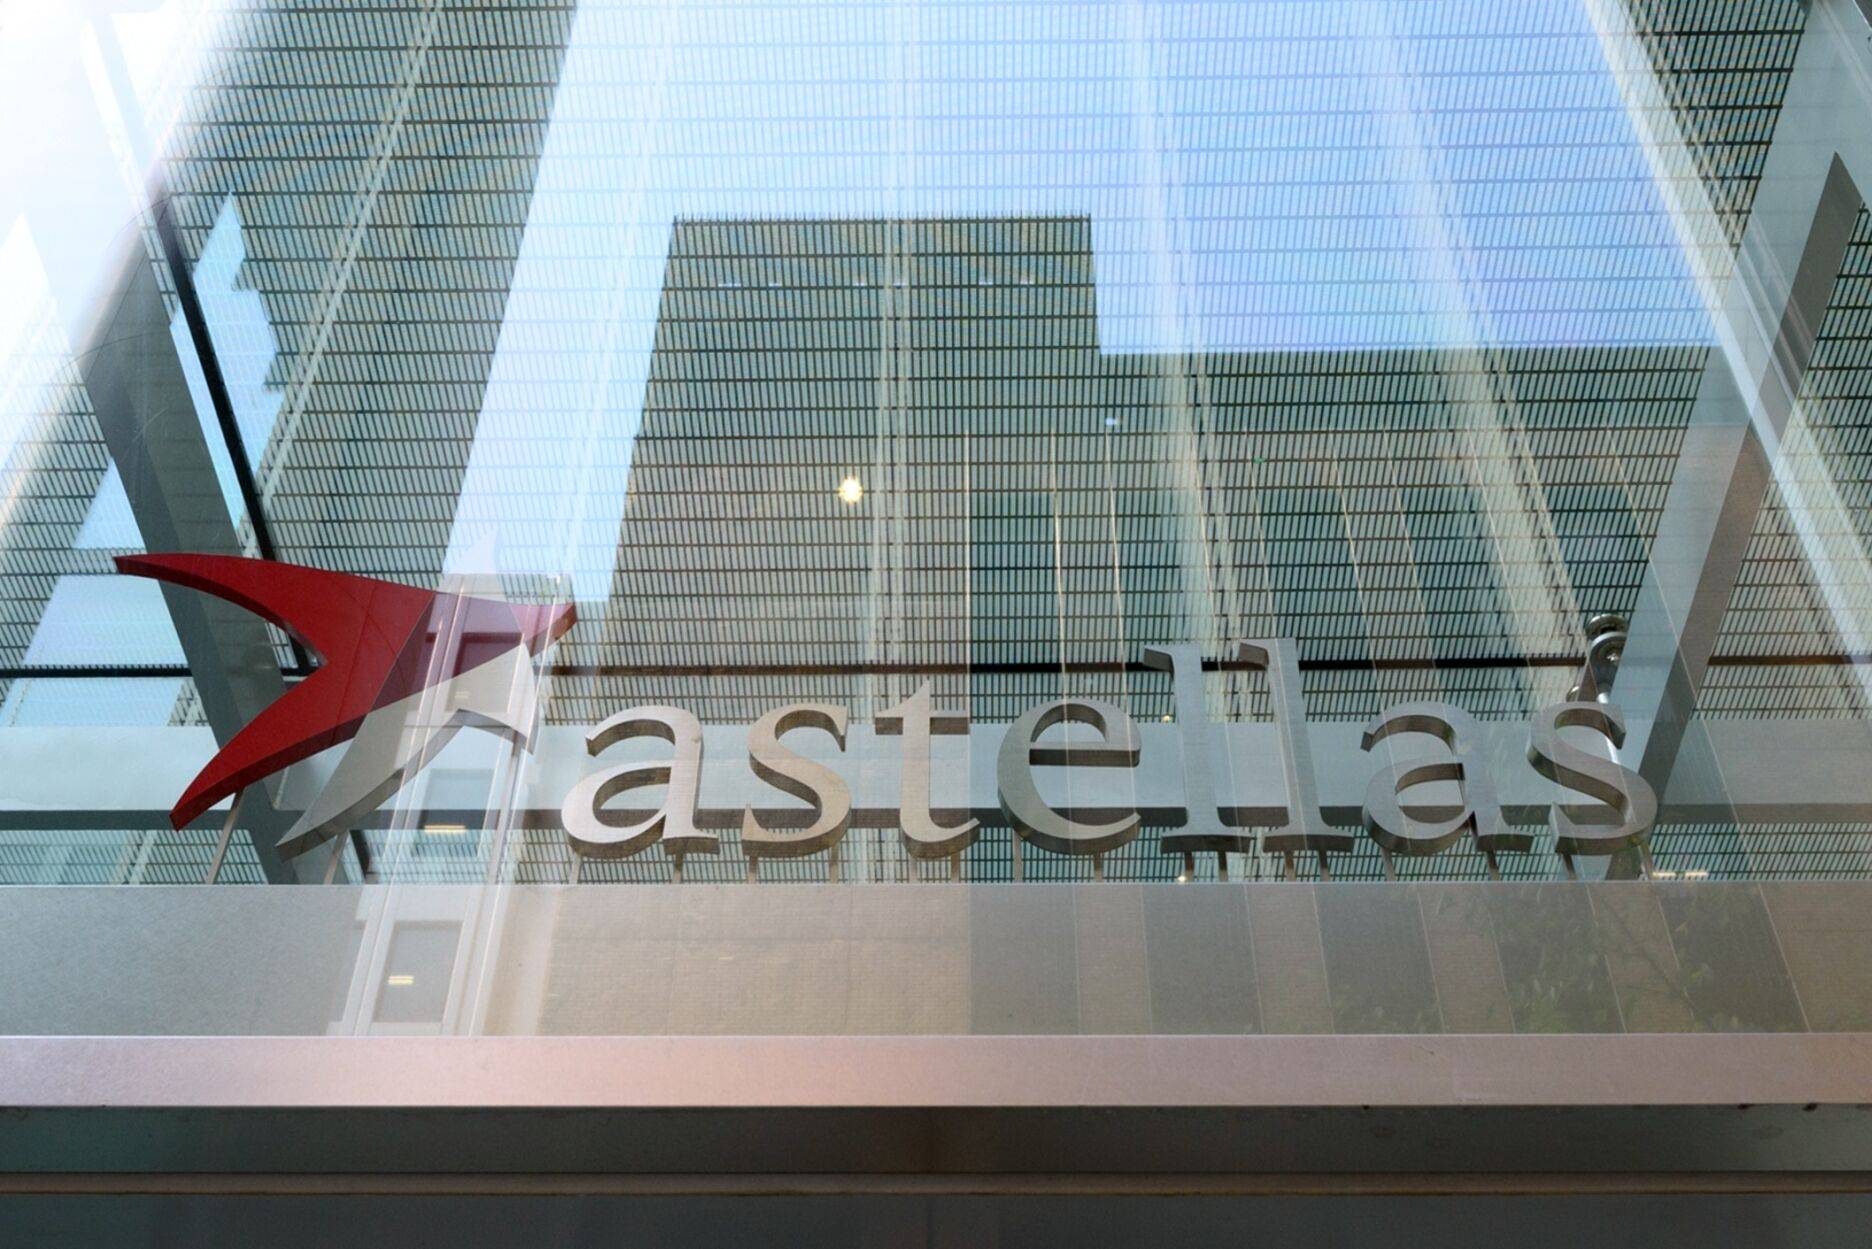 A Japanese man detained in Beijing since earlier this month for allegedly violating Chinese law is an employee of Astellas Pharma Inc., a spokesperson for the Japanese drugmaker confirmed Sunday. | BLOOMBERG